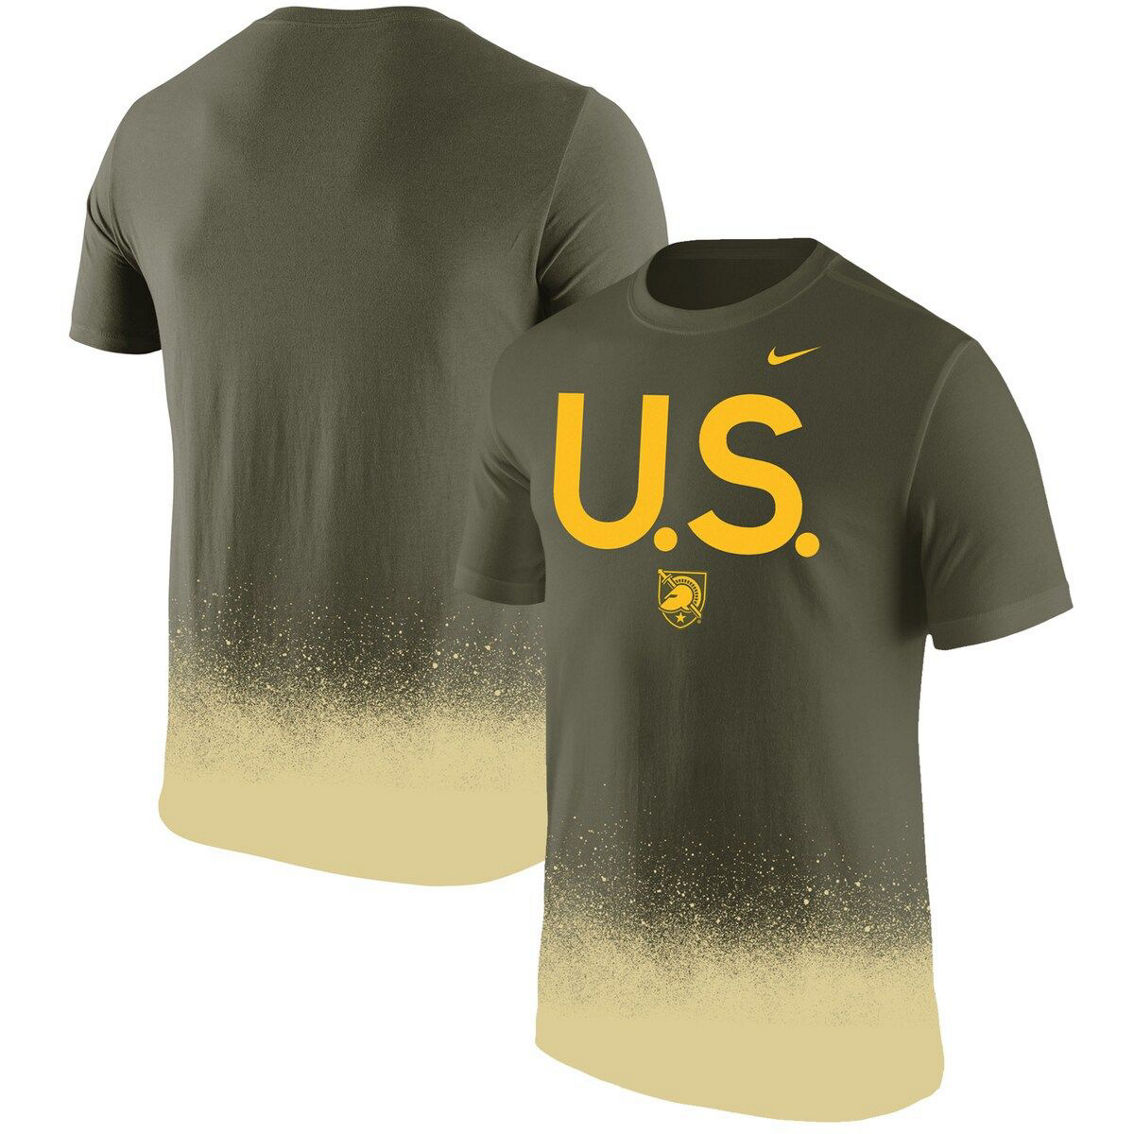 Nike Men's Olive Army Black Knights 1st Armored Division Old Ironsides Rivalry Splatter T-Shirt - Image 2 of 4